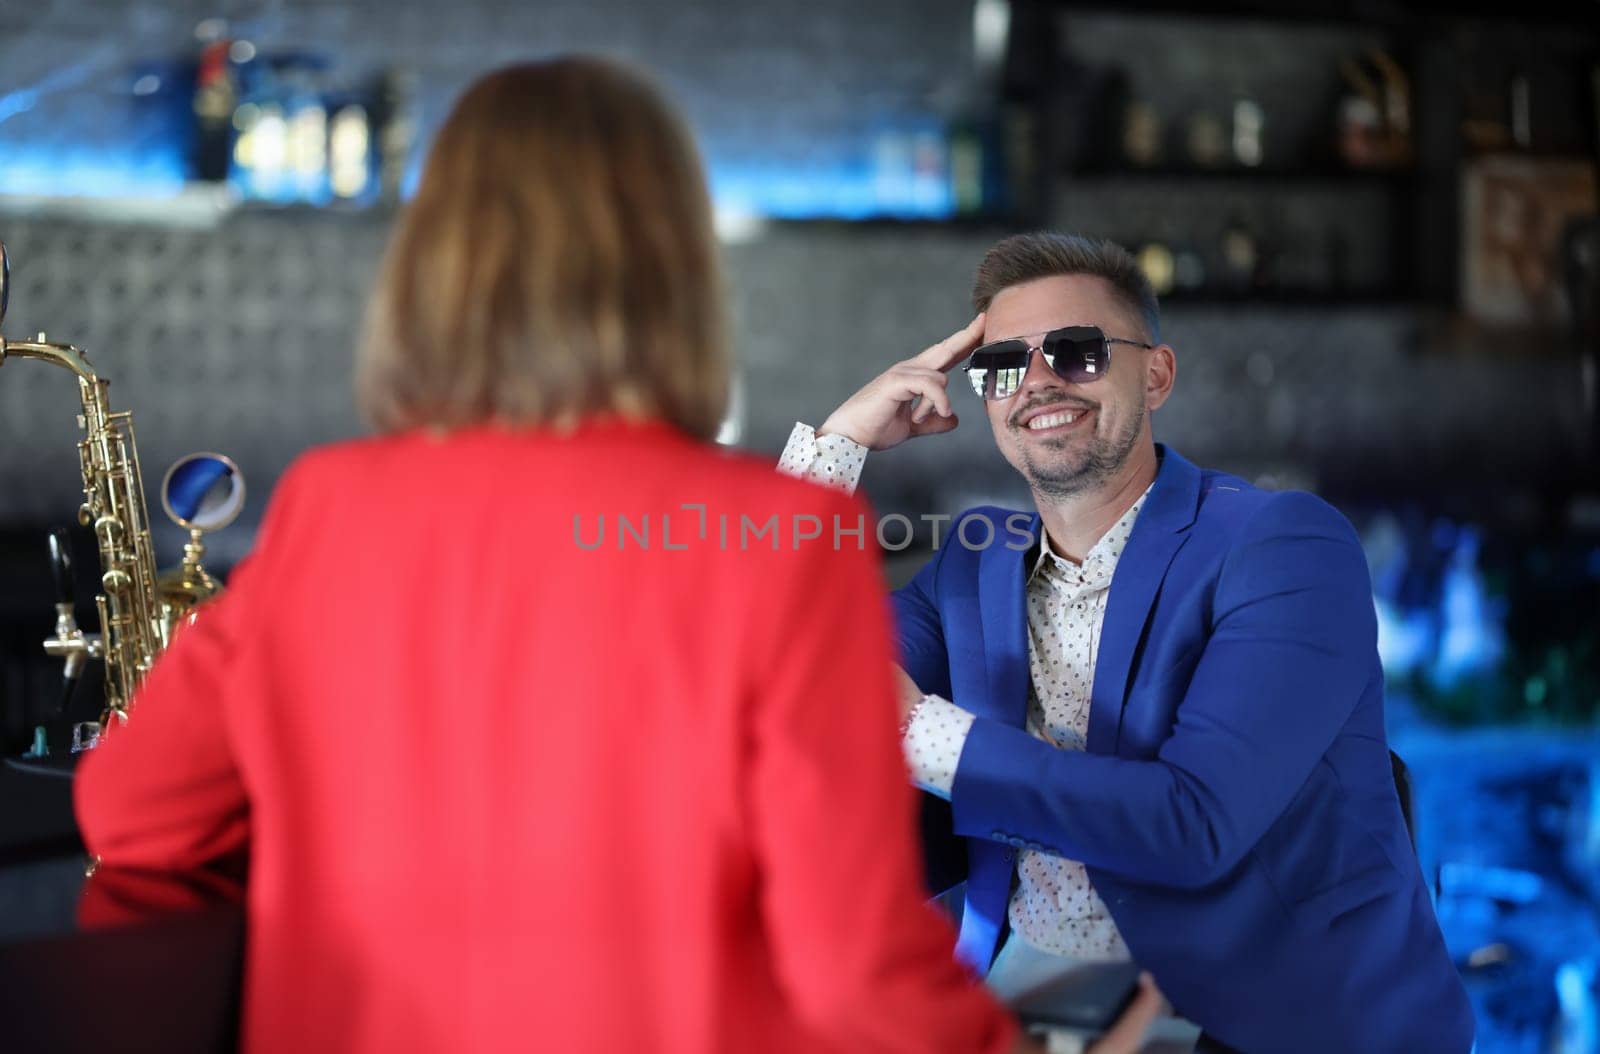 Smiling confident man in sunglasses meets woman near bar counter. Narcissistic personality disorder in men concept